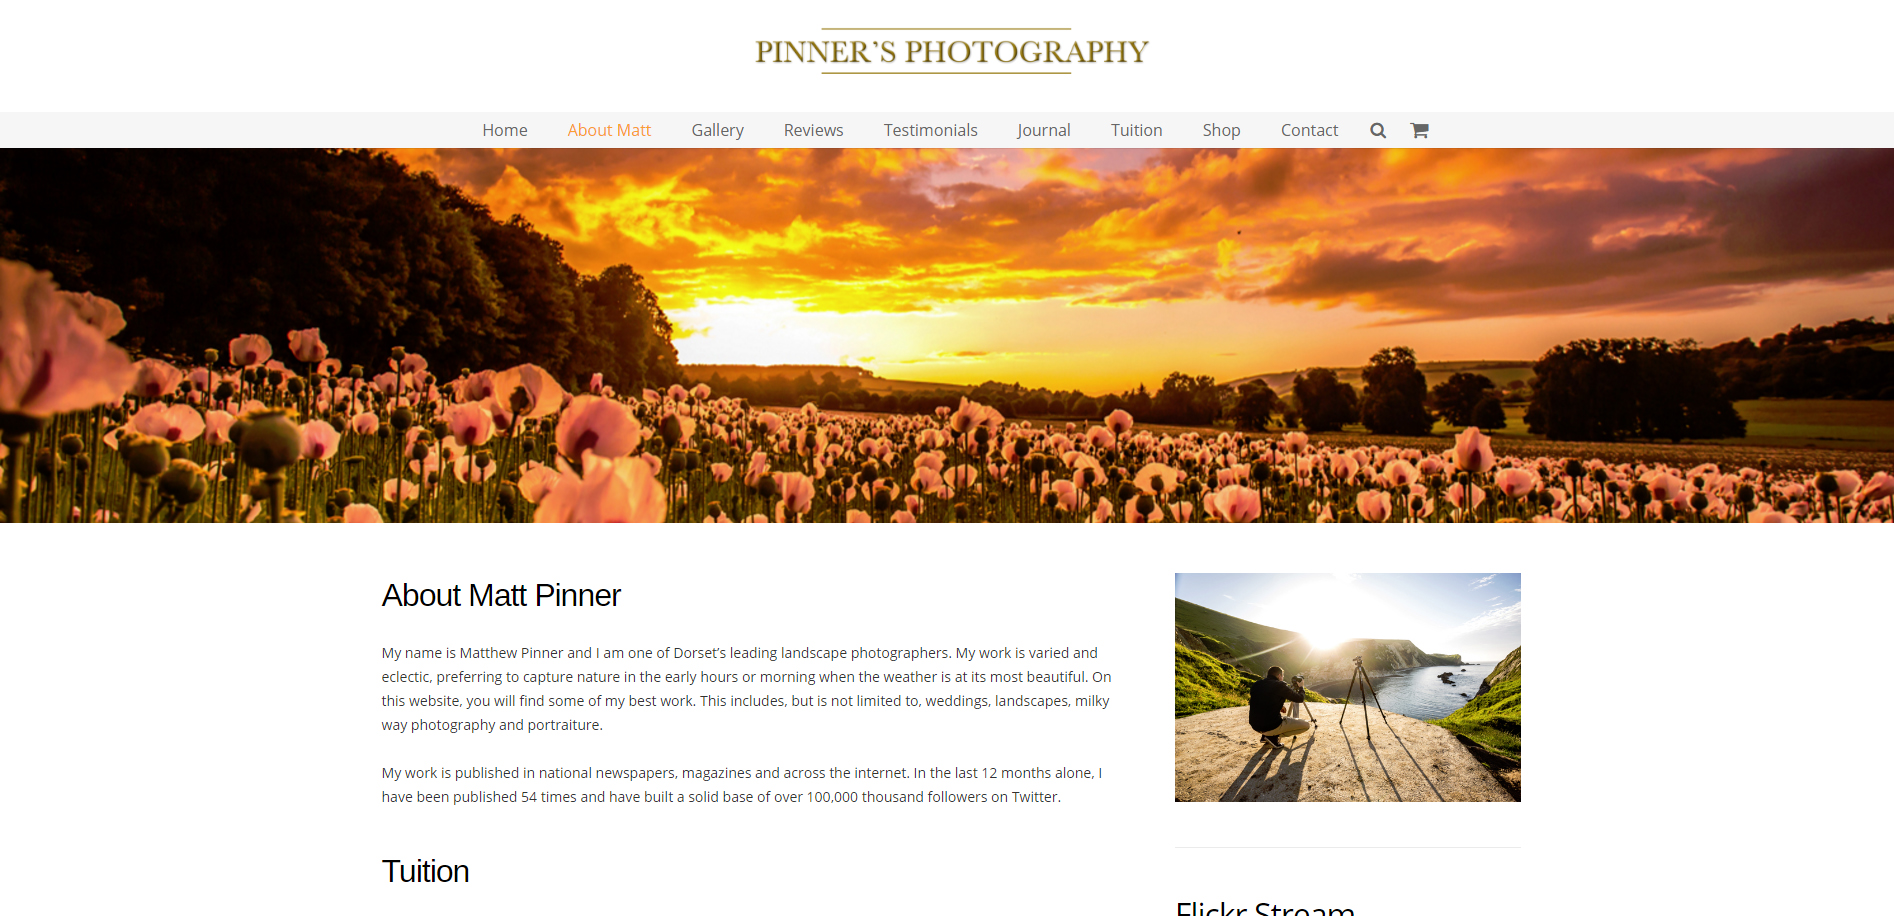 New Site Launched for Pinners Photography